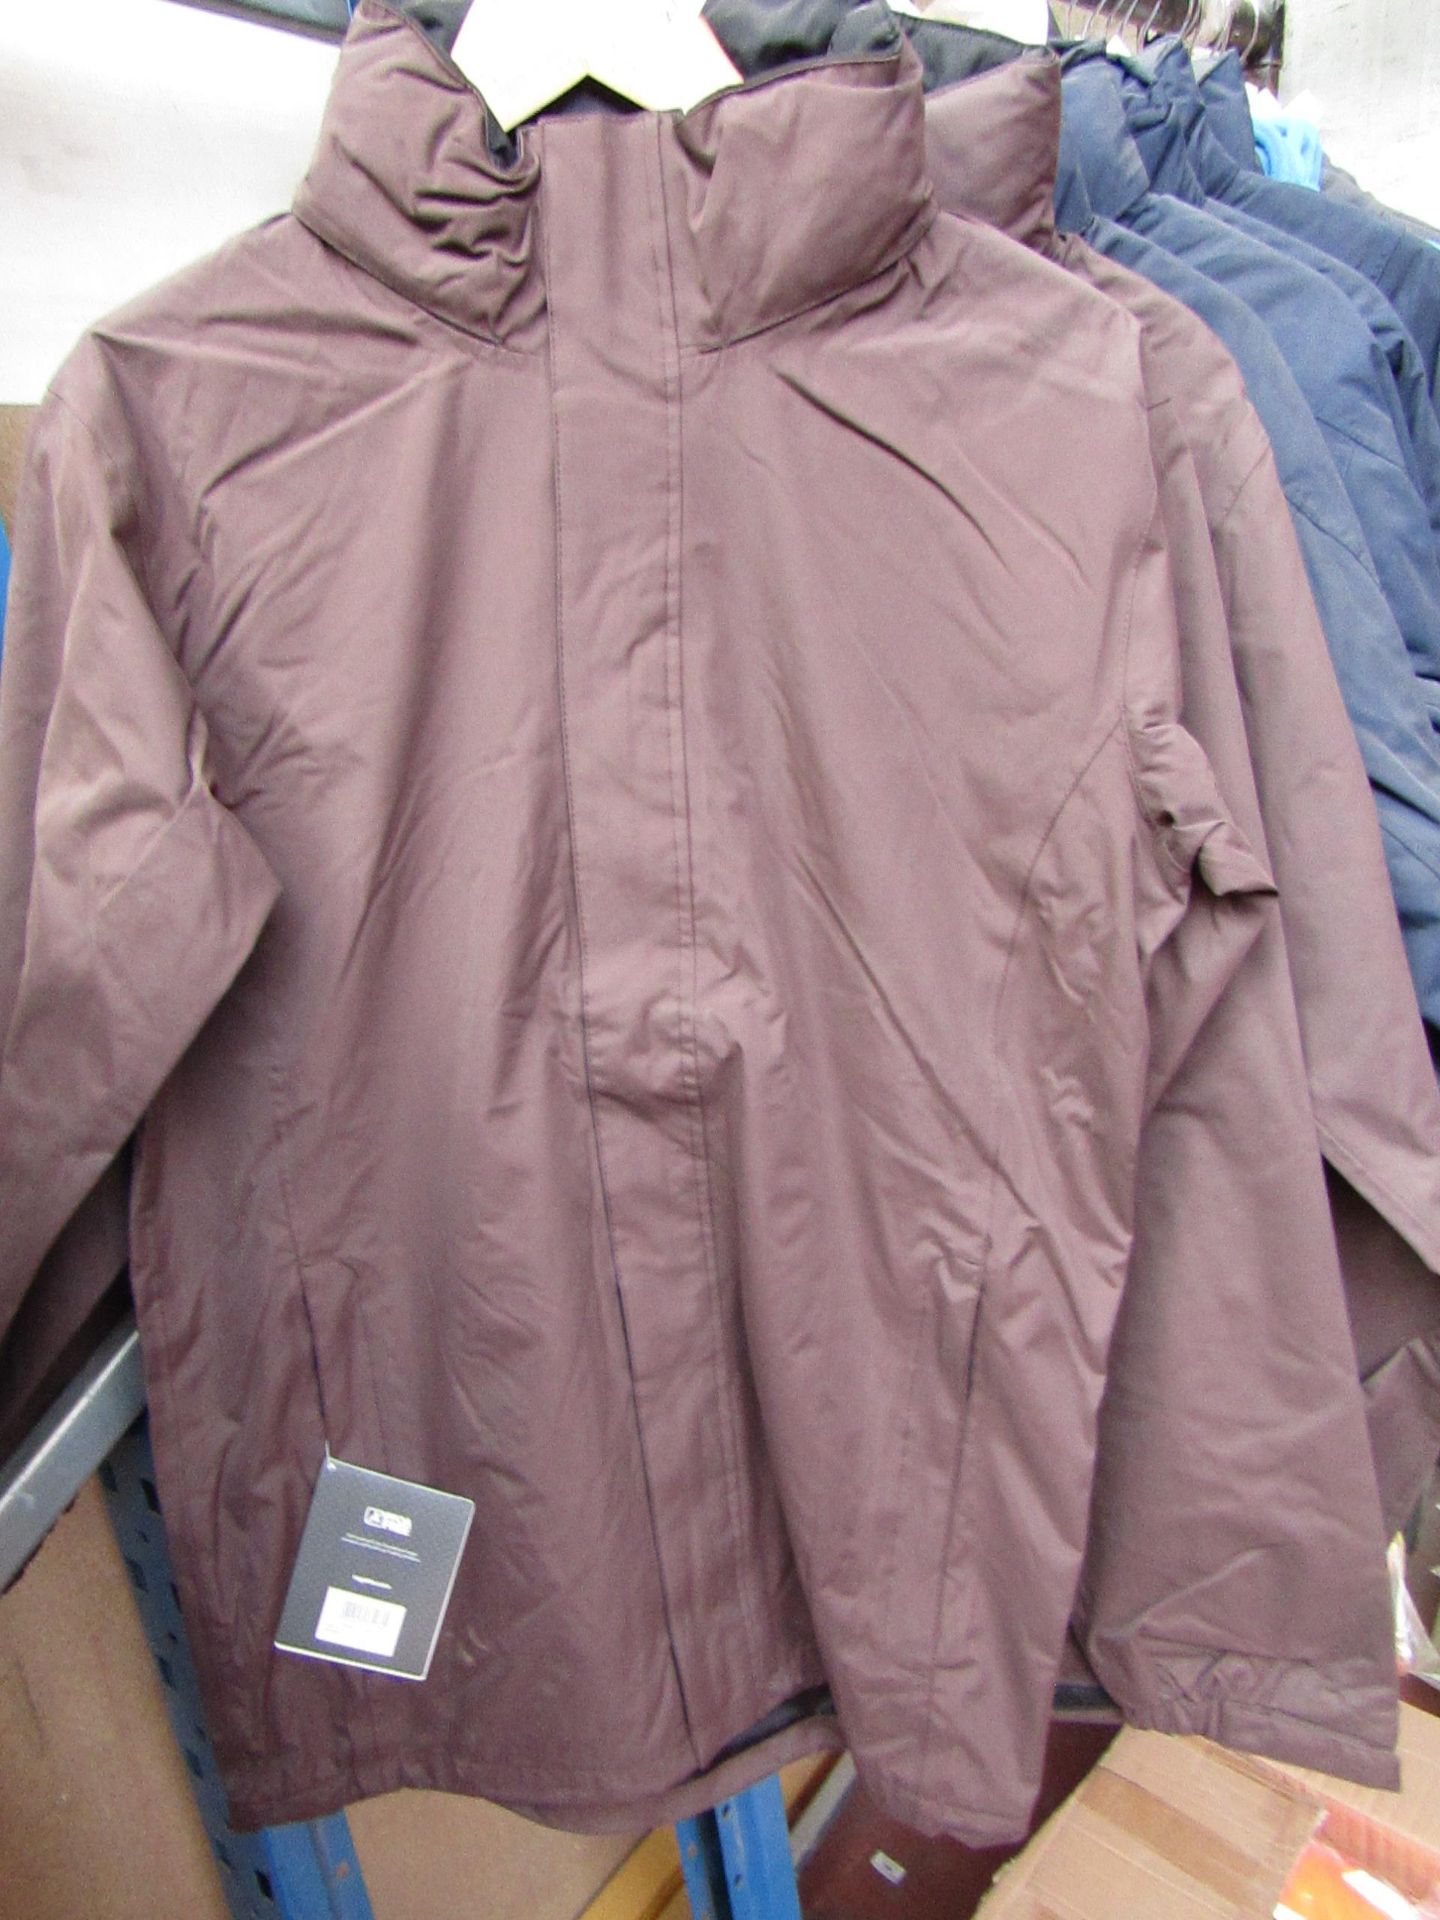 Regatta Wind Proof and water proof jacket, new size small